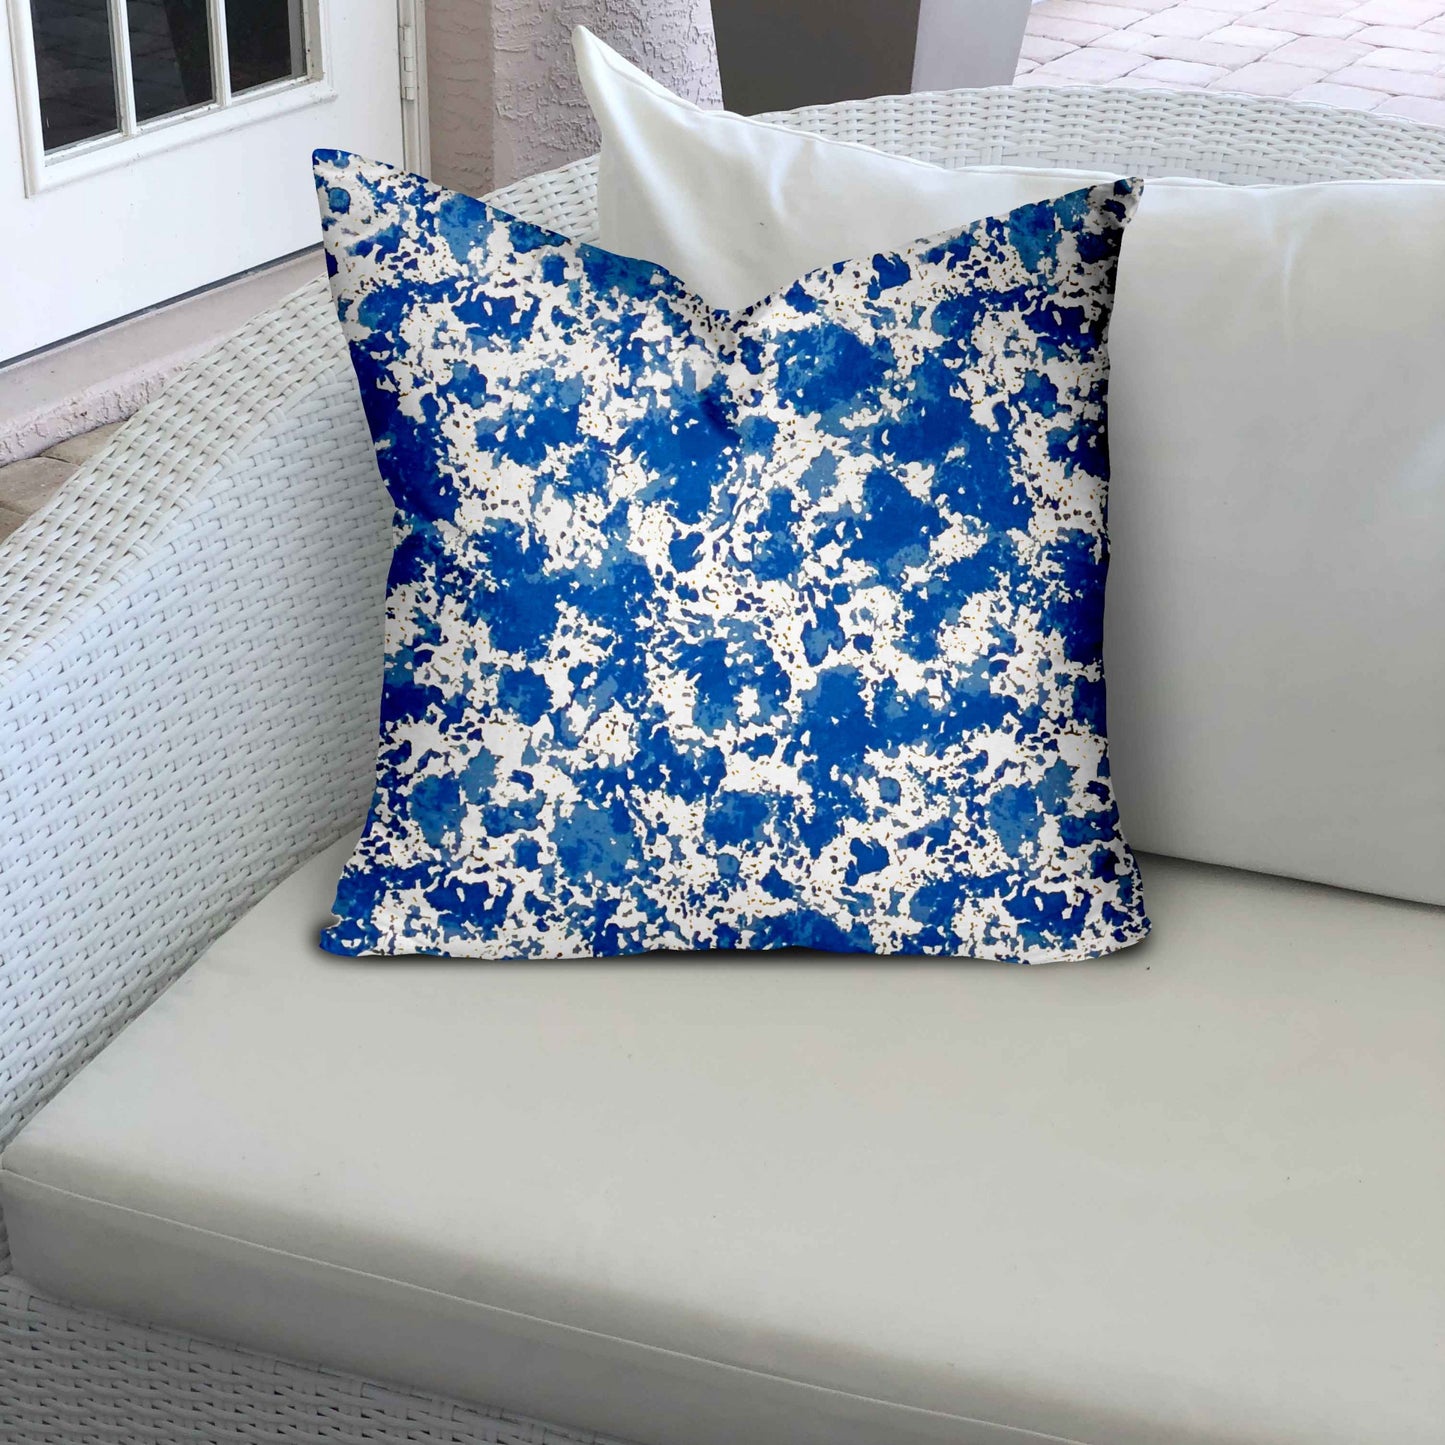 20" X 20" Blue And White Enveloped Coastal Throw Indoor Outdoor Pillow